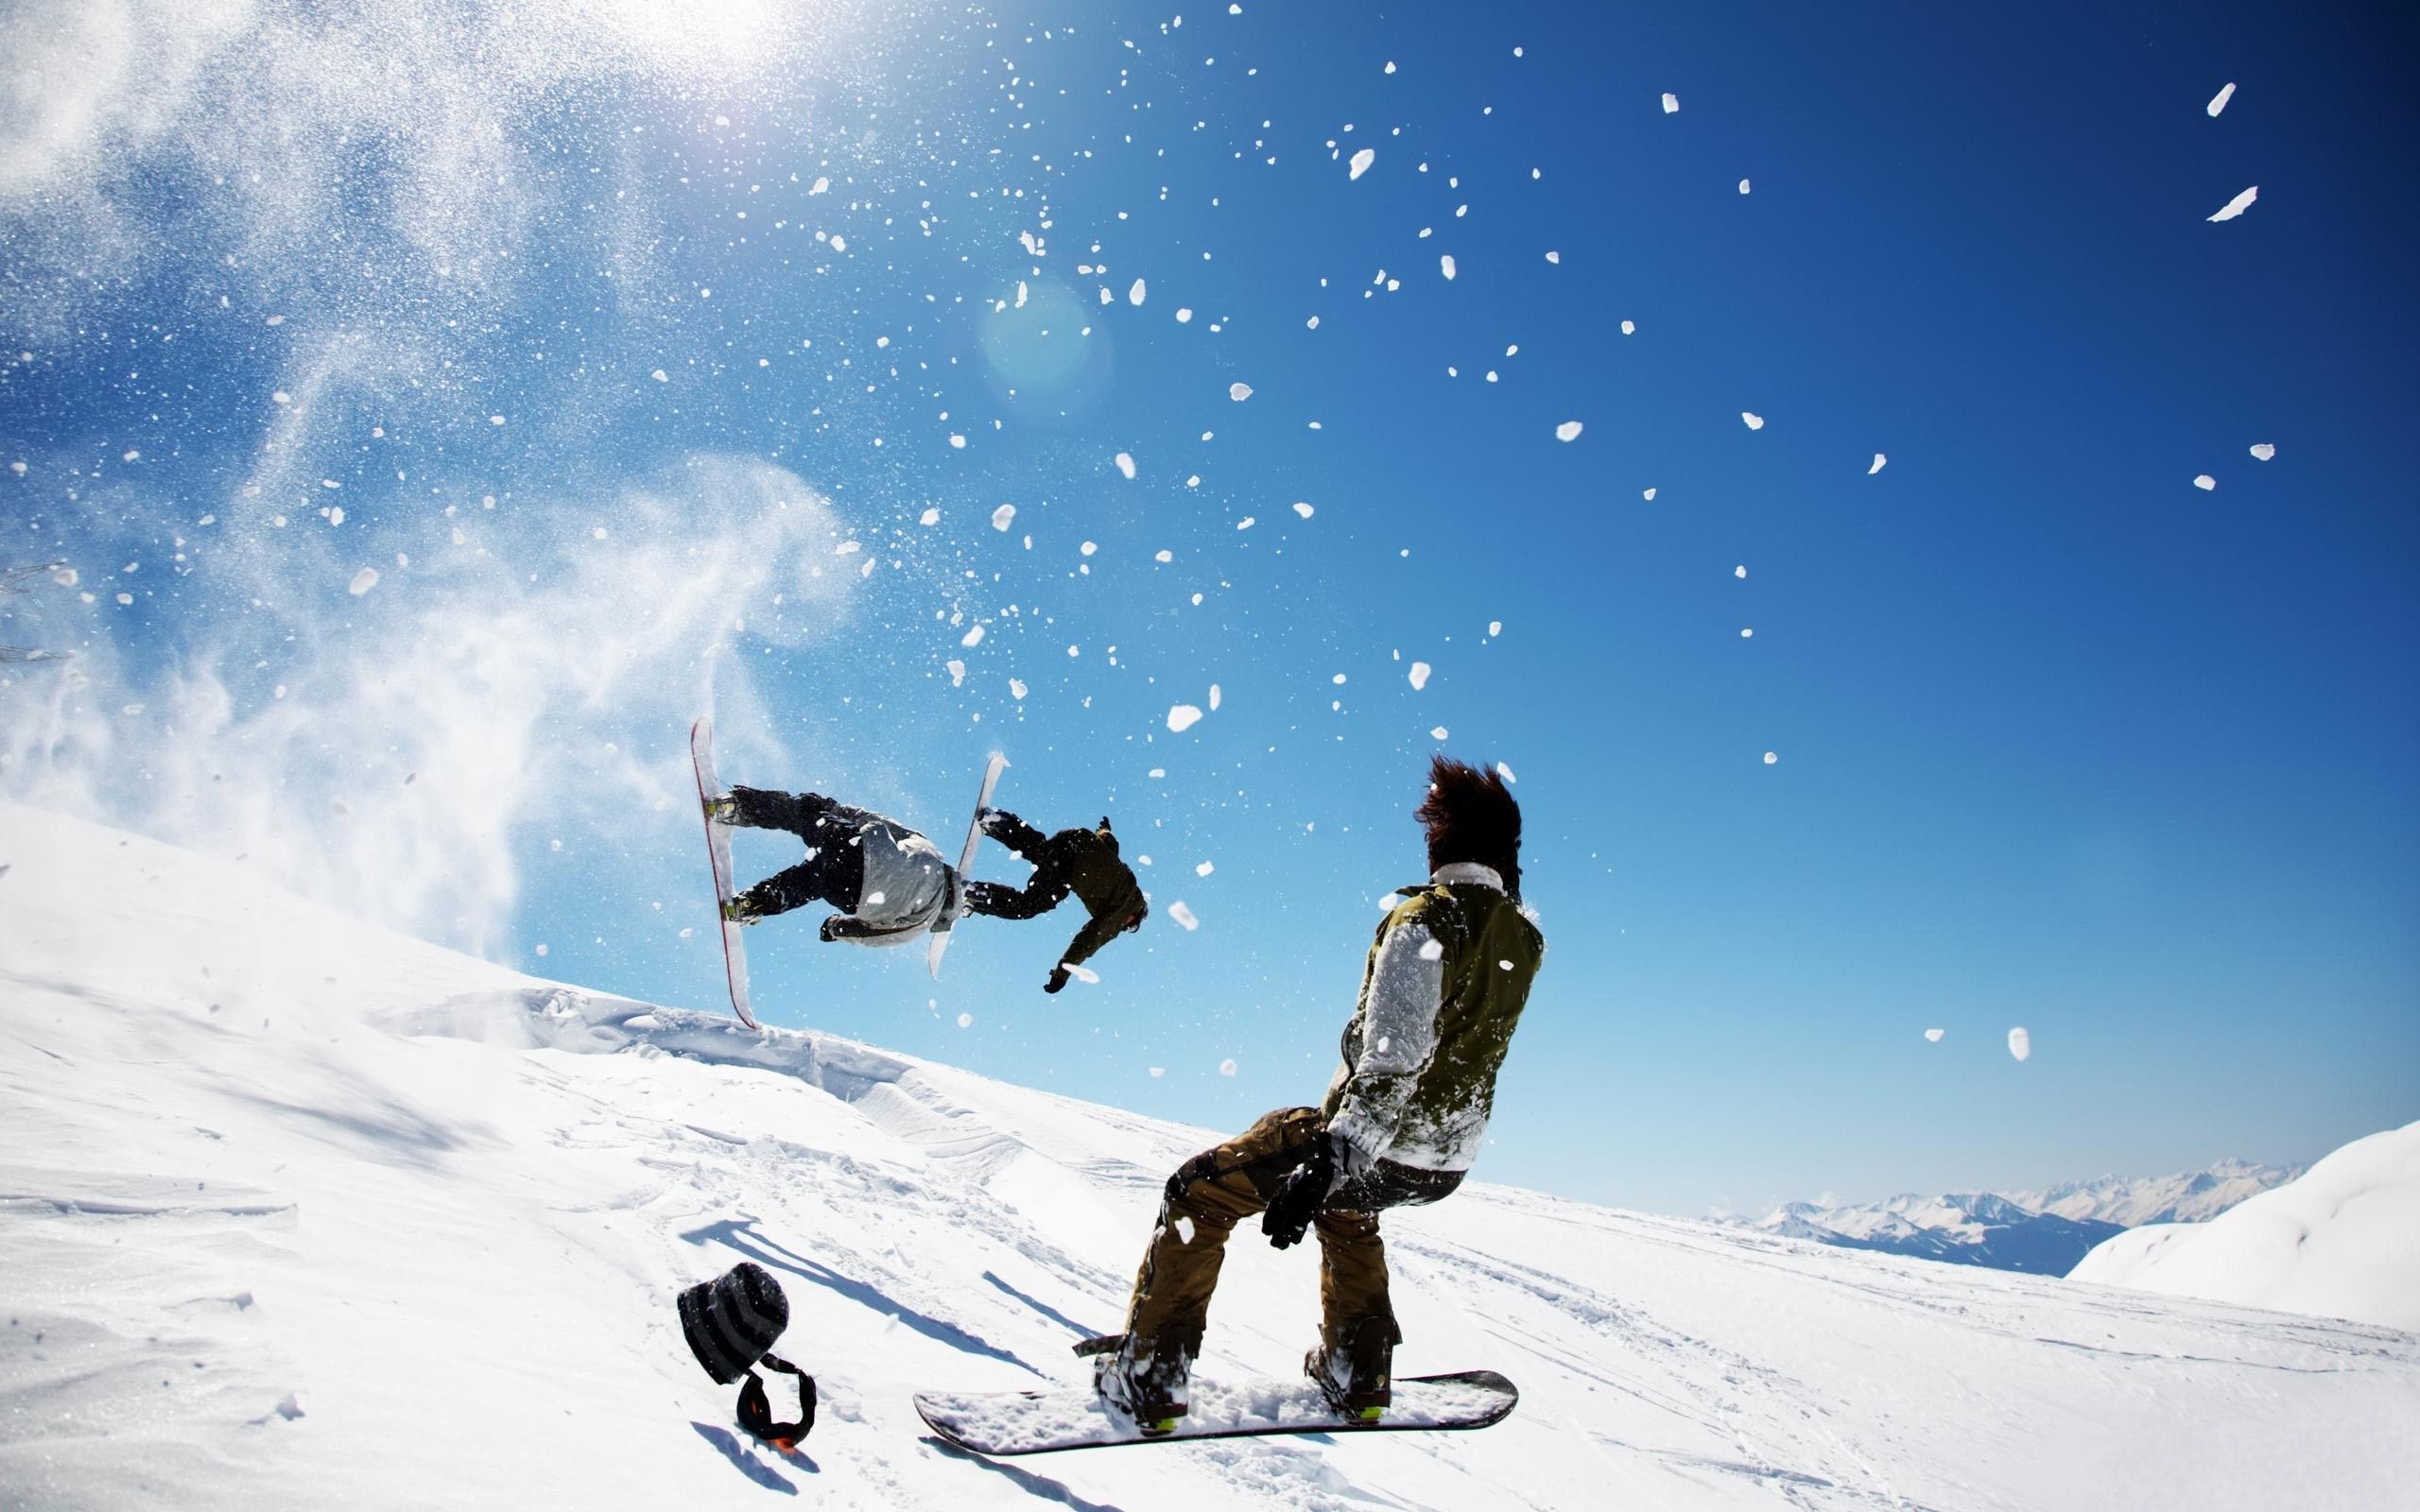 2560x1600 Top Snowboard Wallpaper Snowboarding Sports Images for Pinterest